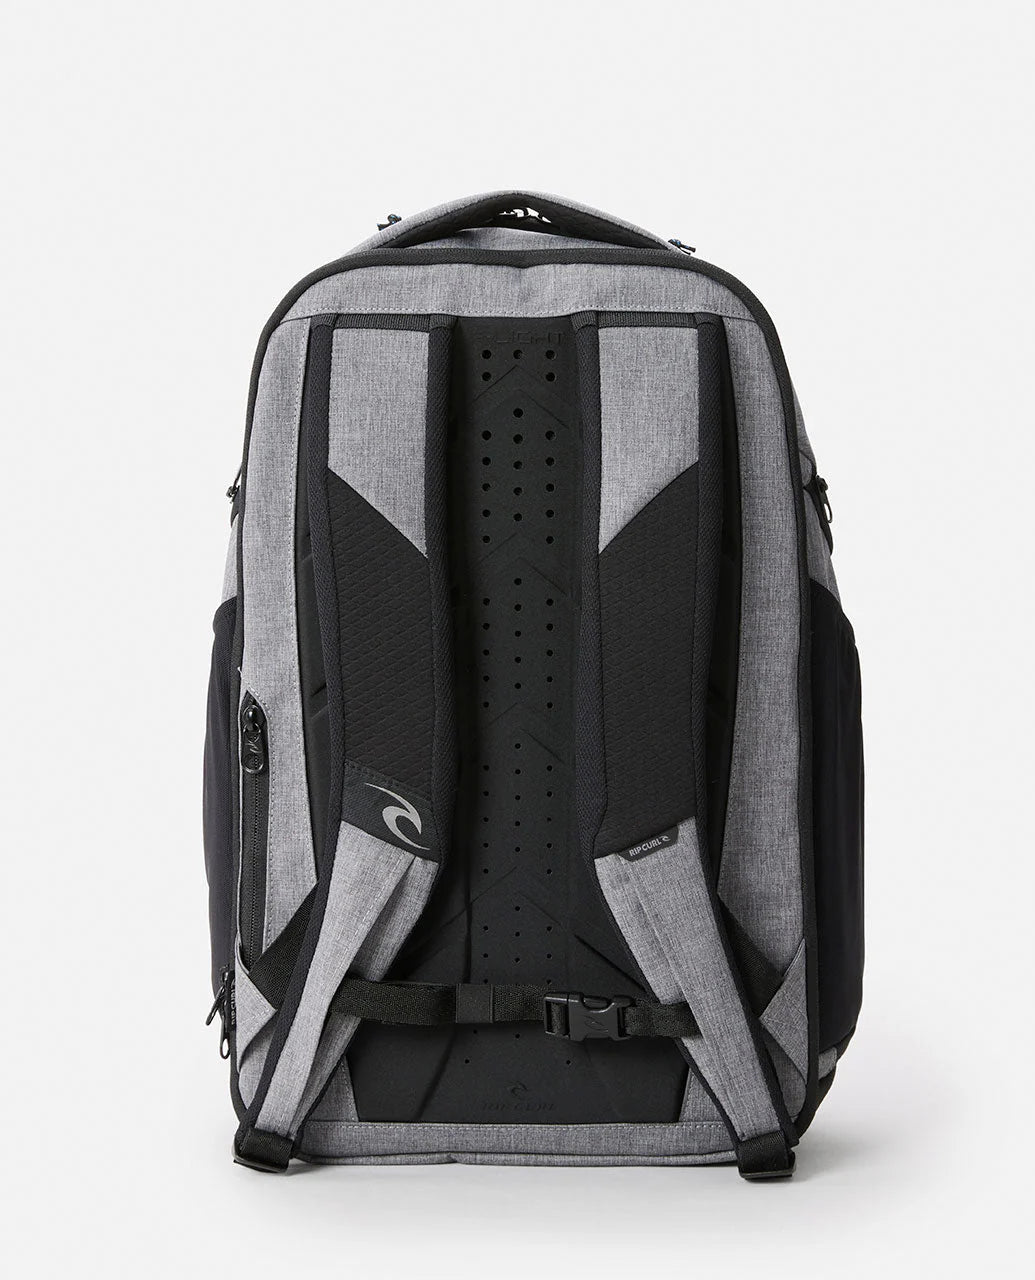 RC F-Light Searcher 45L IOS Backpack - Grey Marle